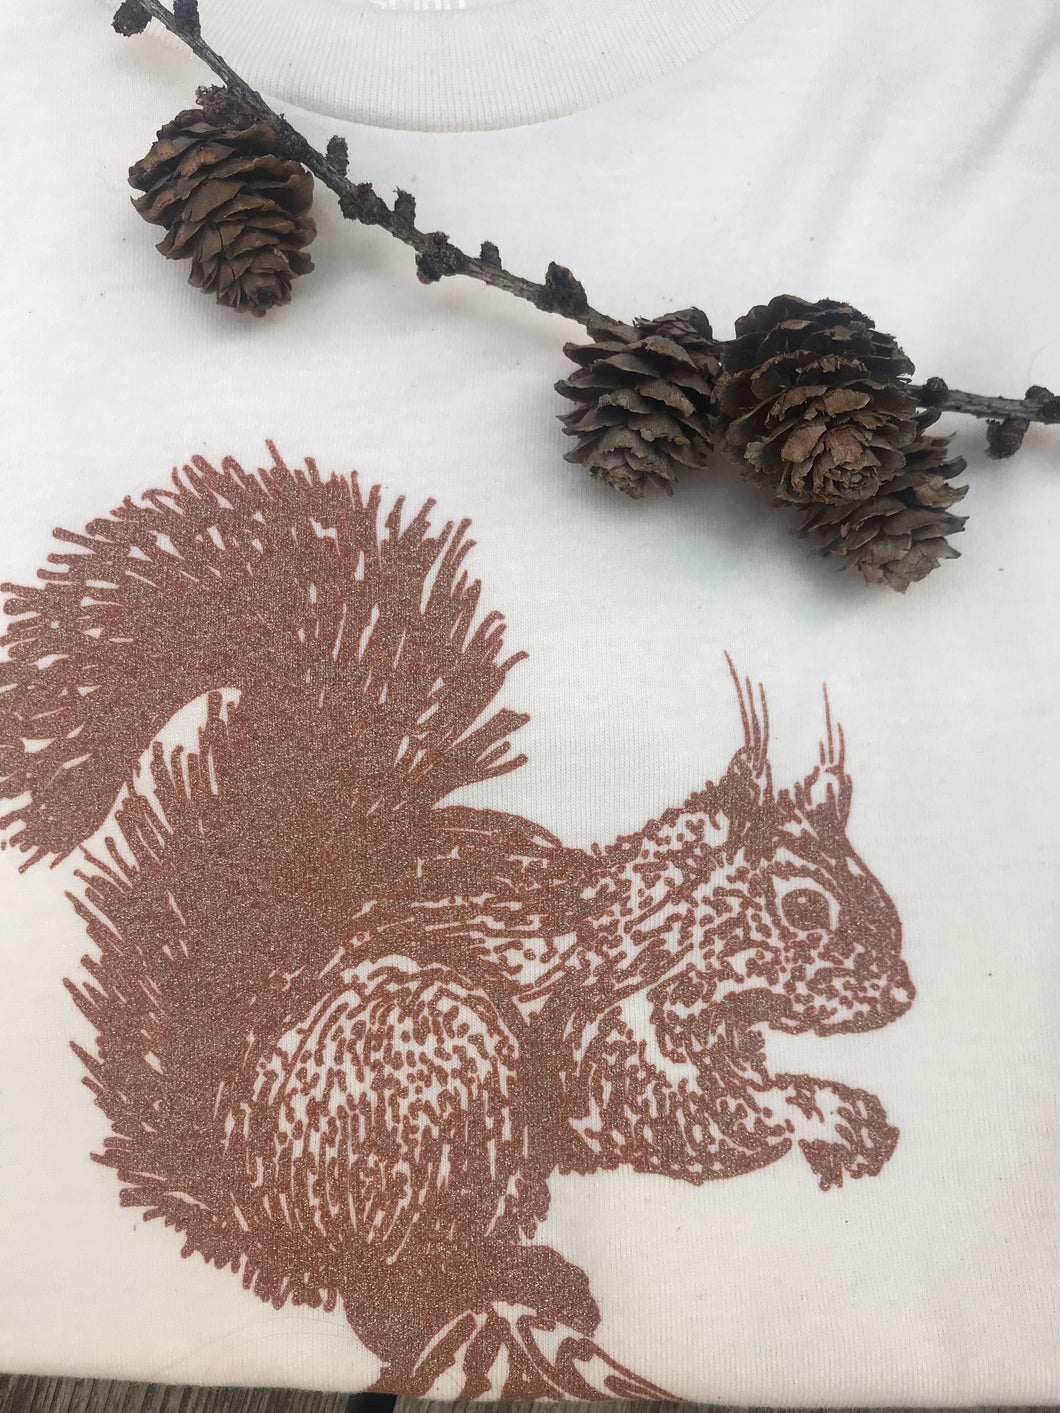 Squirrel Tee